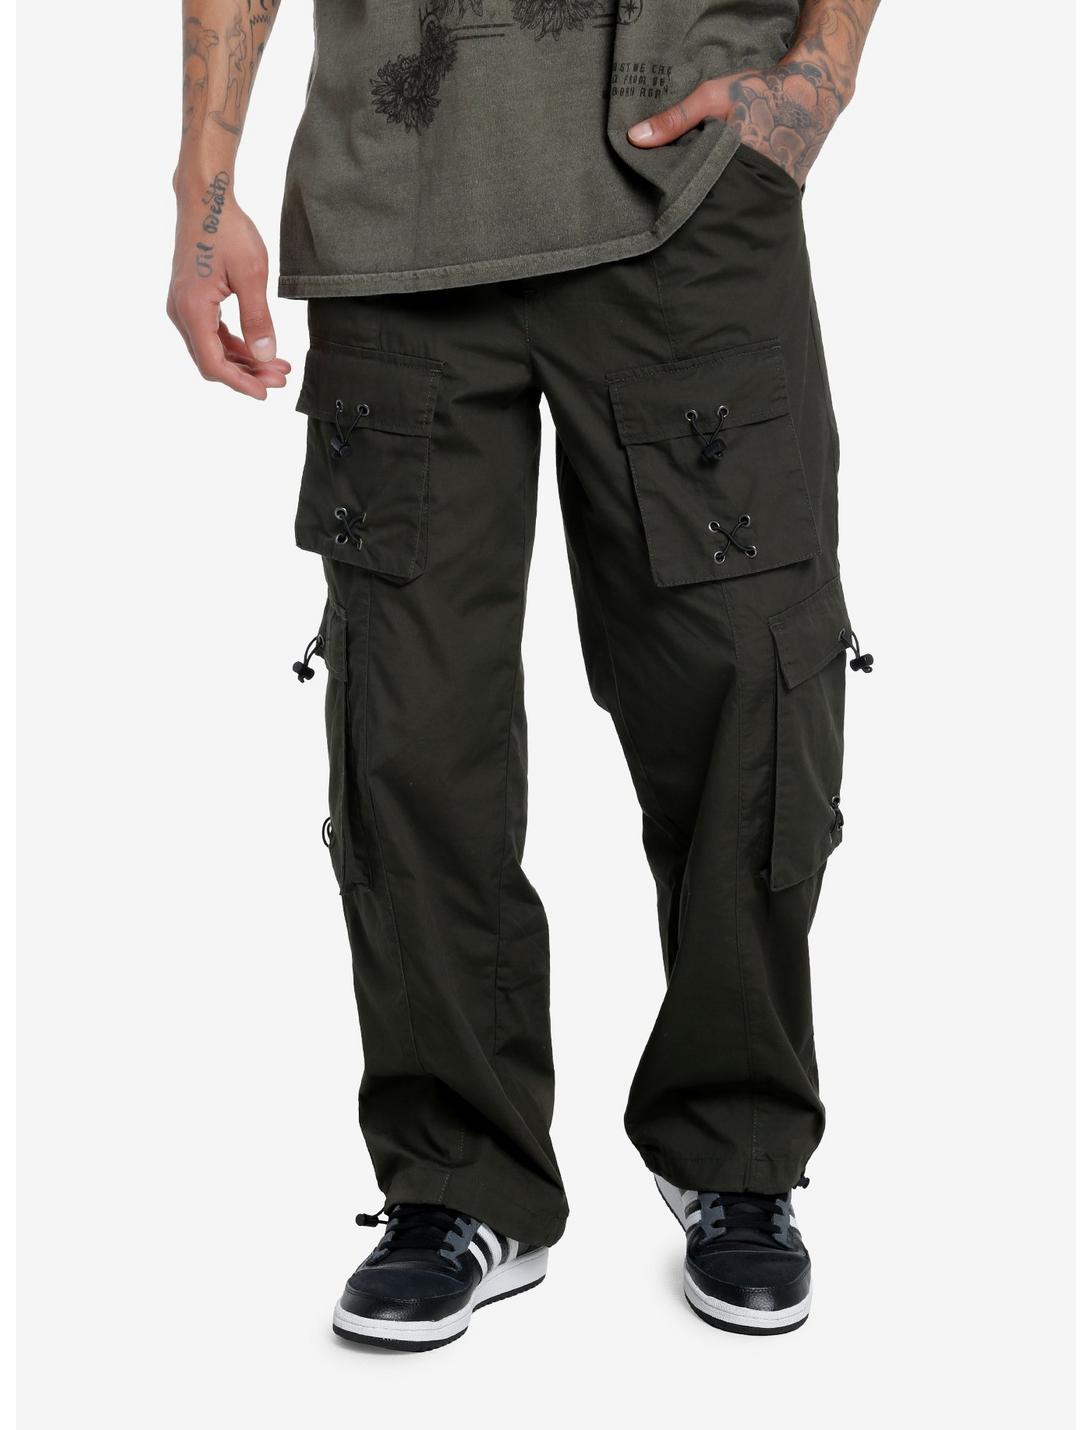 Olive Bungee Cord Cargo Pants, GREY, hi-res